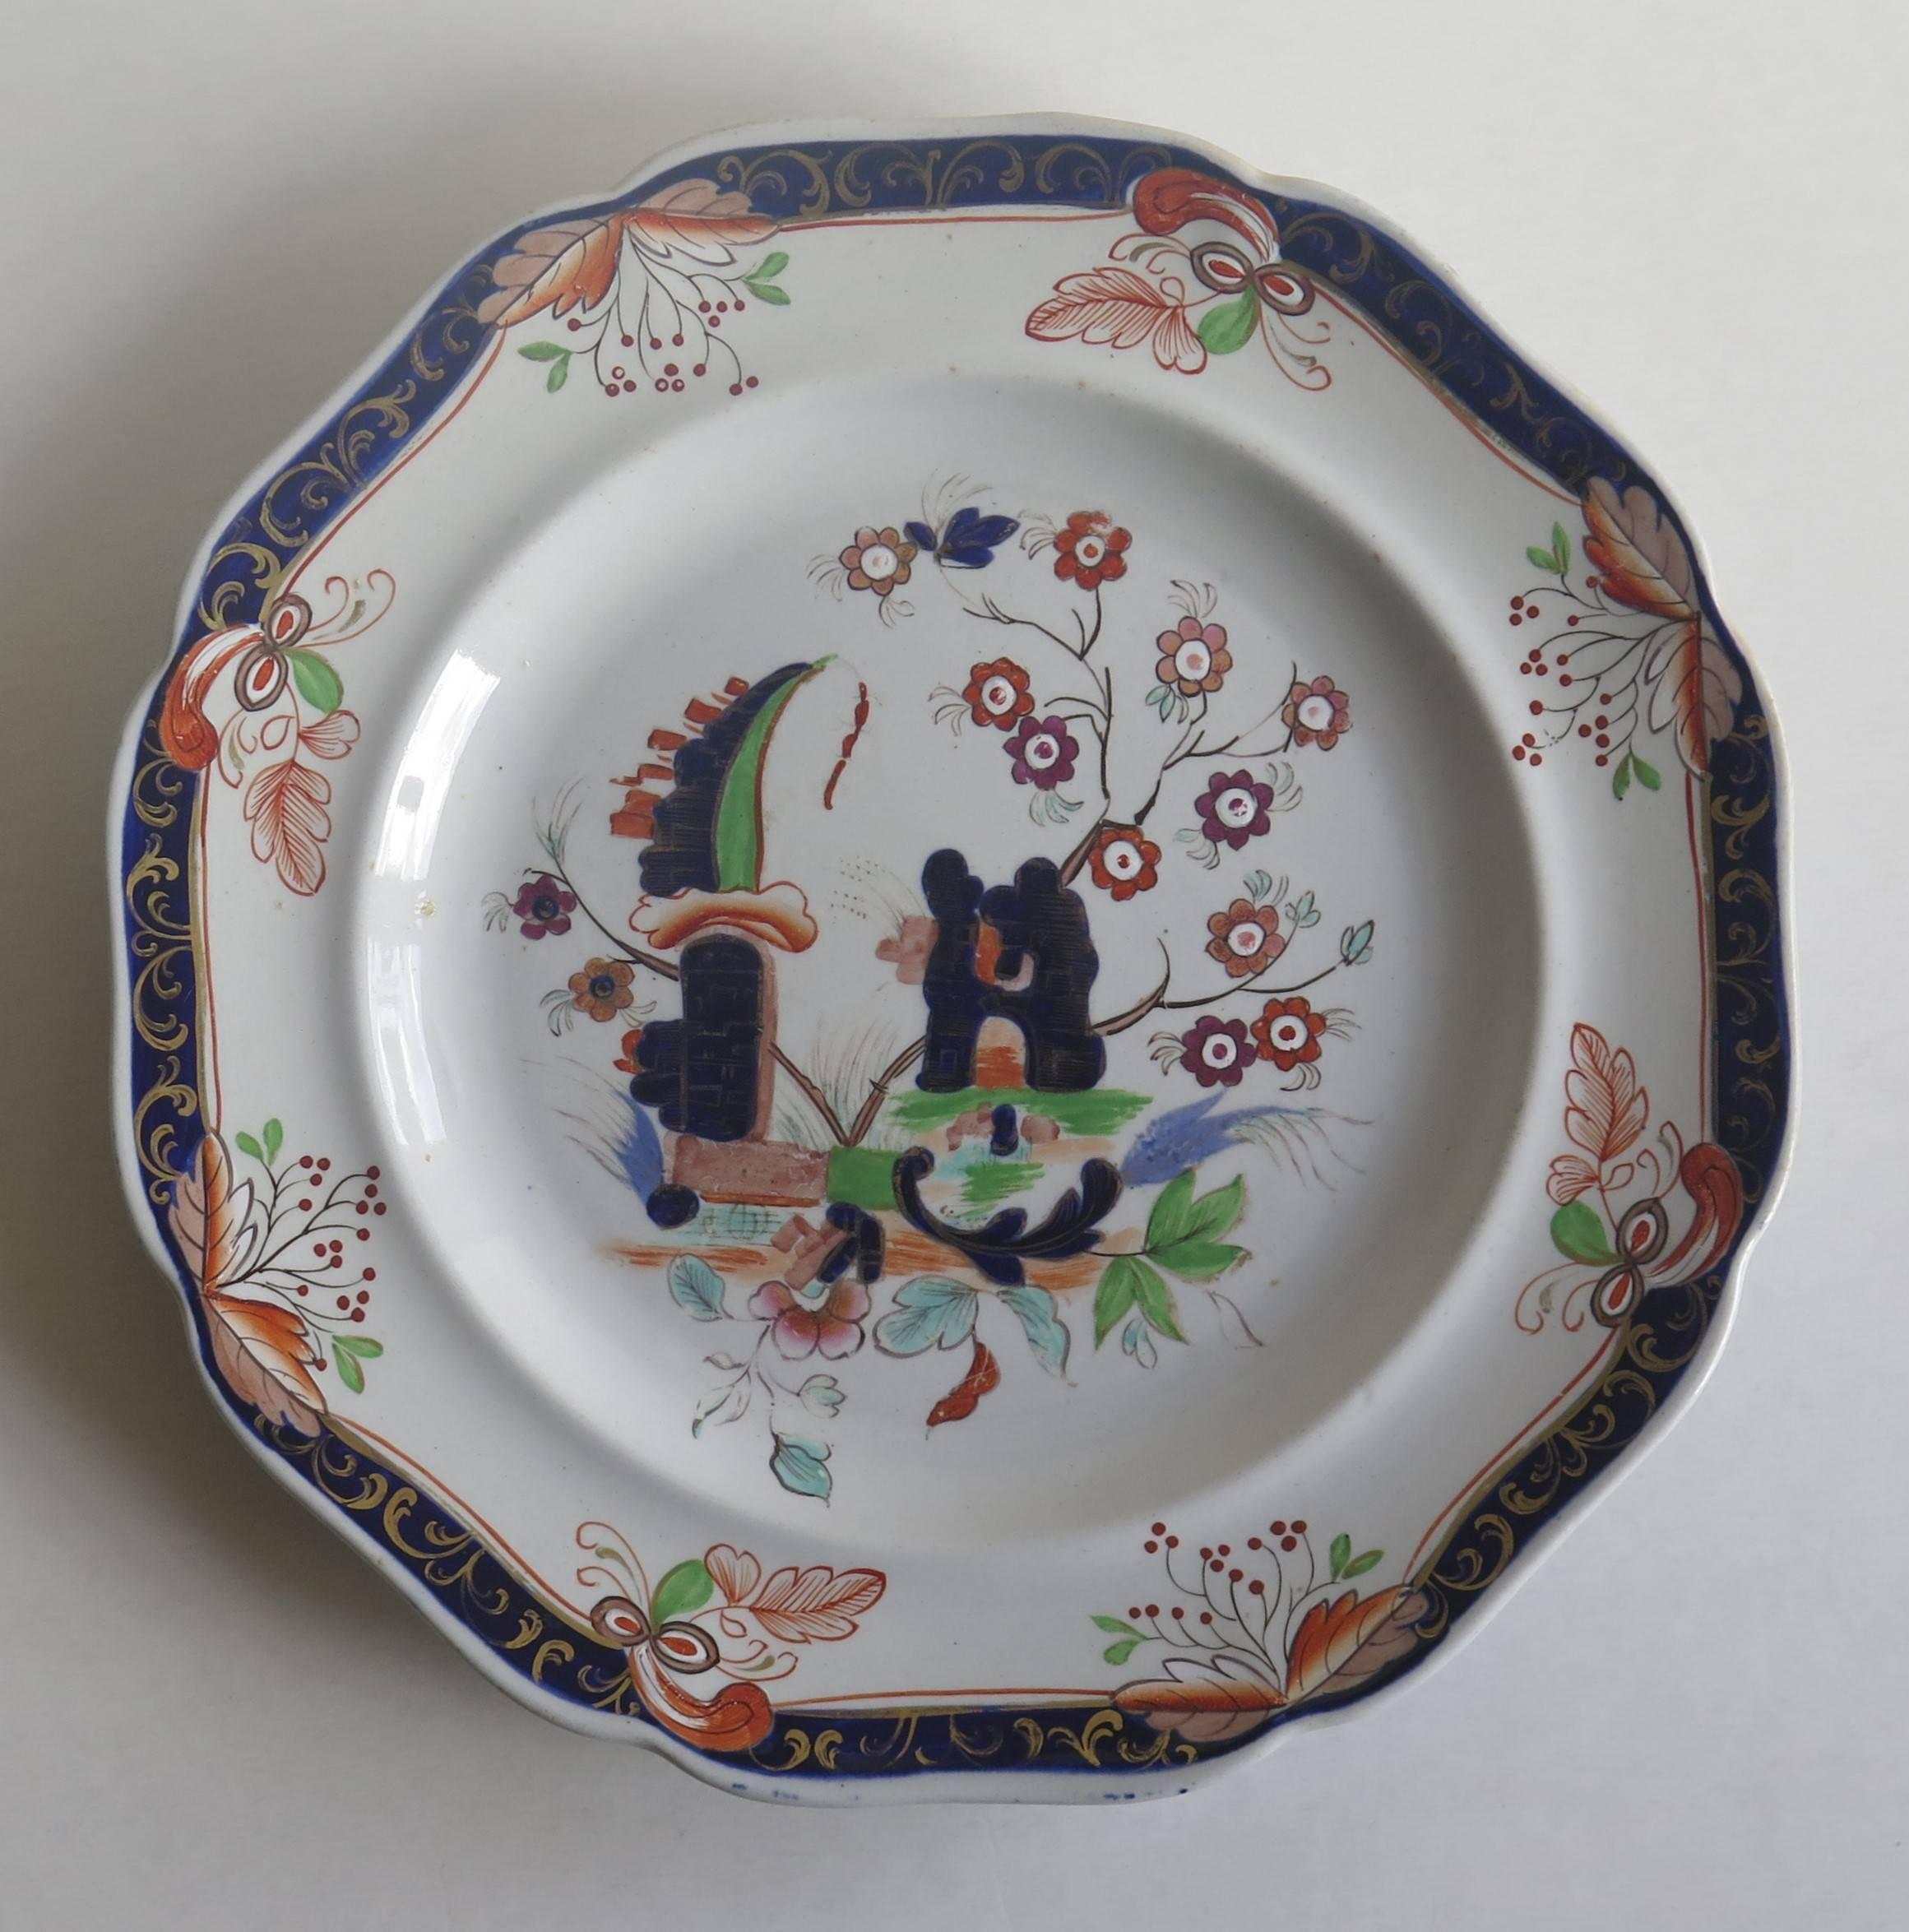 This is a highly decorative, Imperial Stone China (ironstone), plate by John Ridgway, dating to the William IV period of the 19th century. 

This plate has been carefully hand-painted in bold colorful enamels with a striking Chinoiserie pattern,